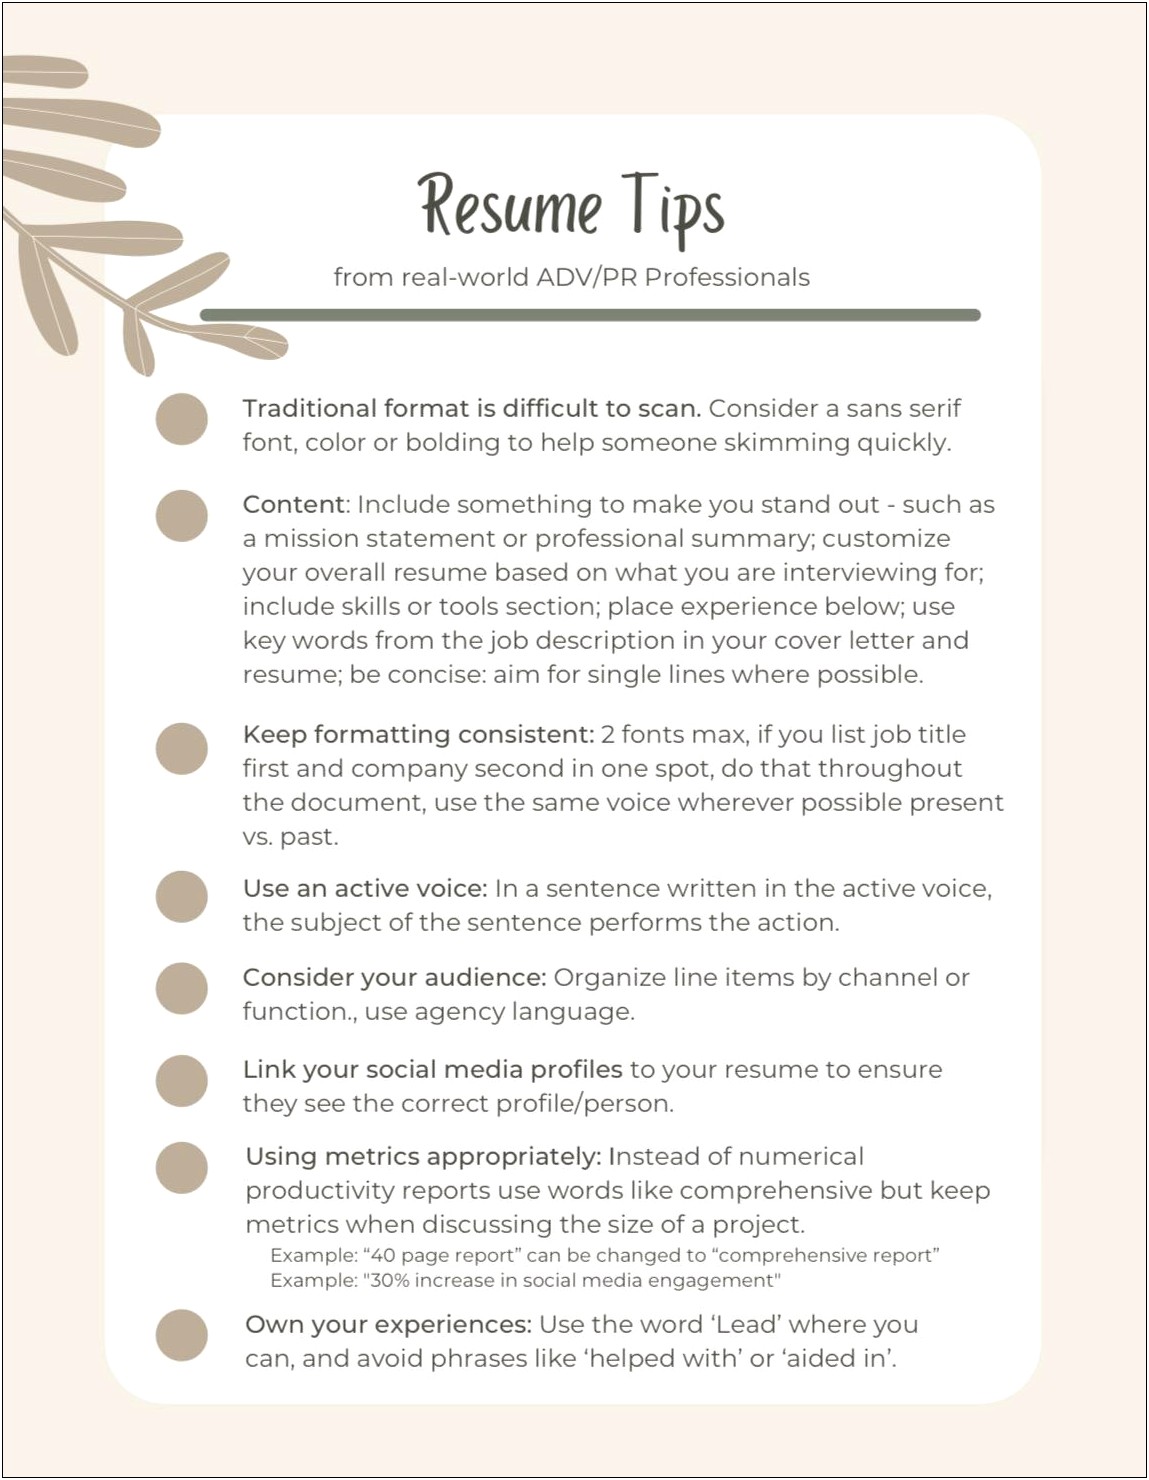 Words To Avoid In Your Resume